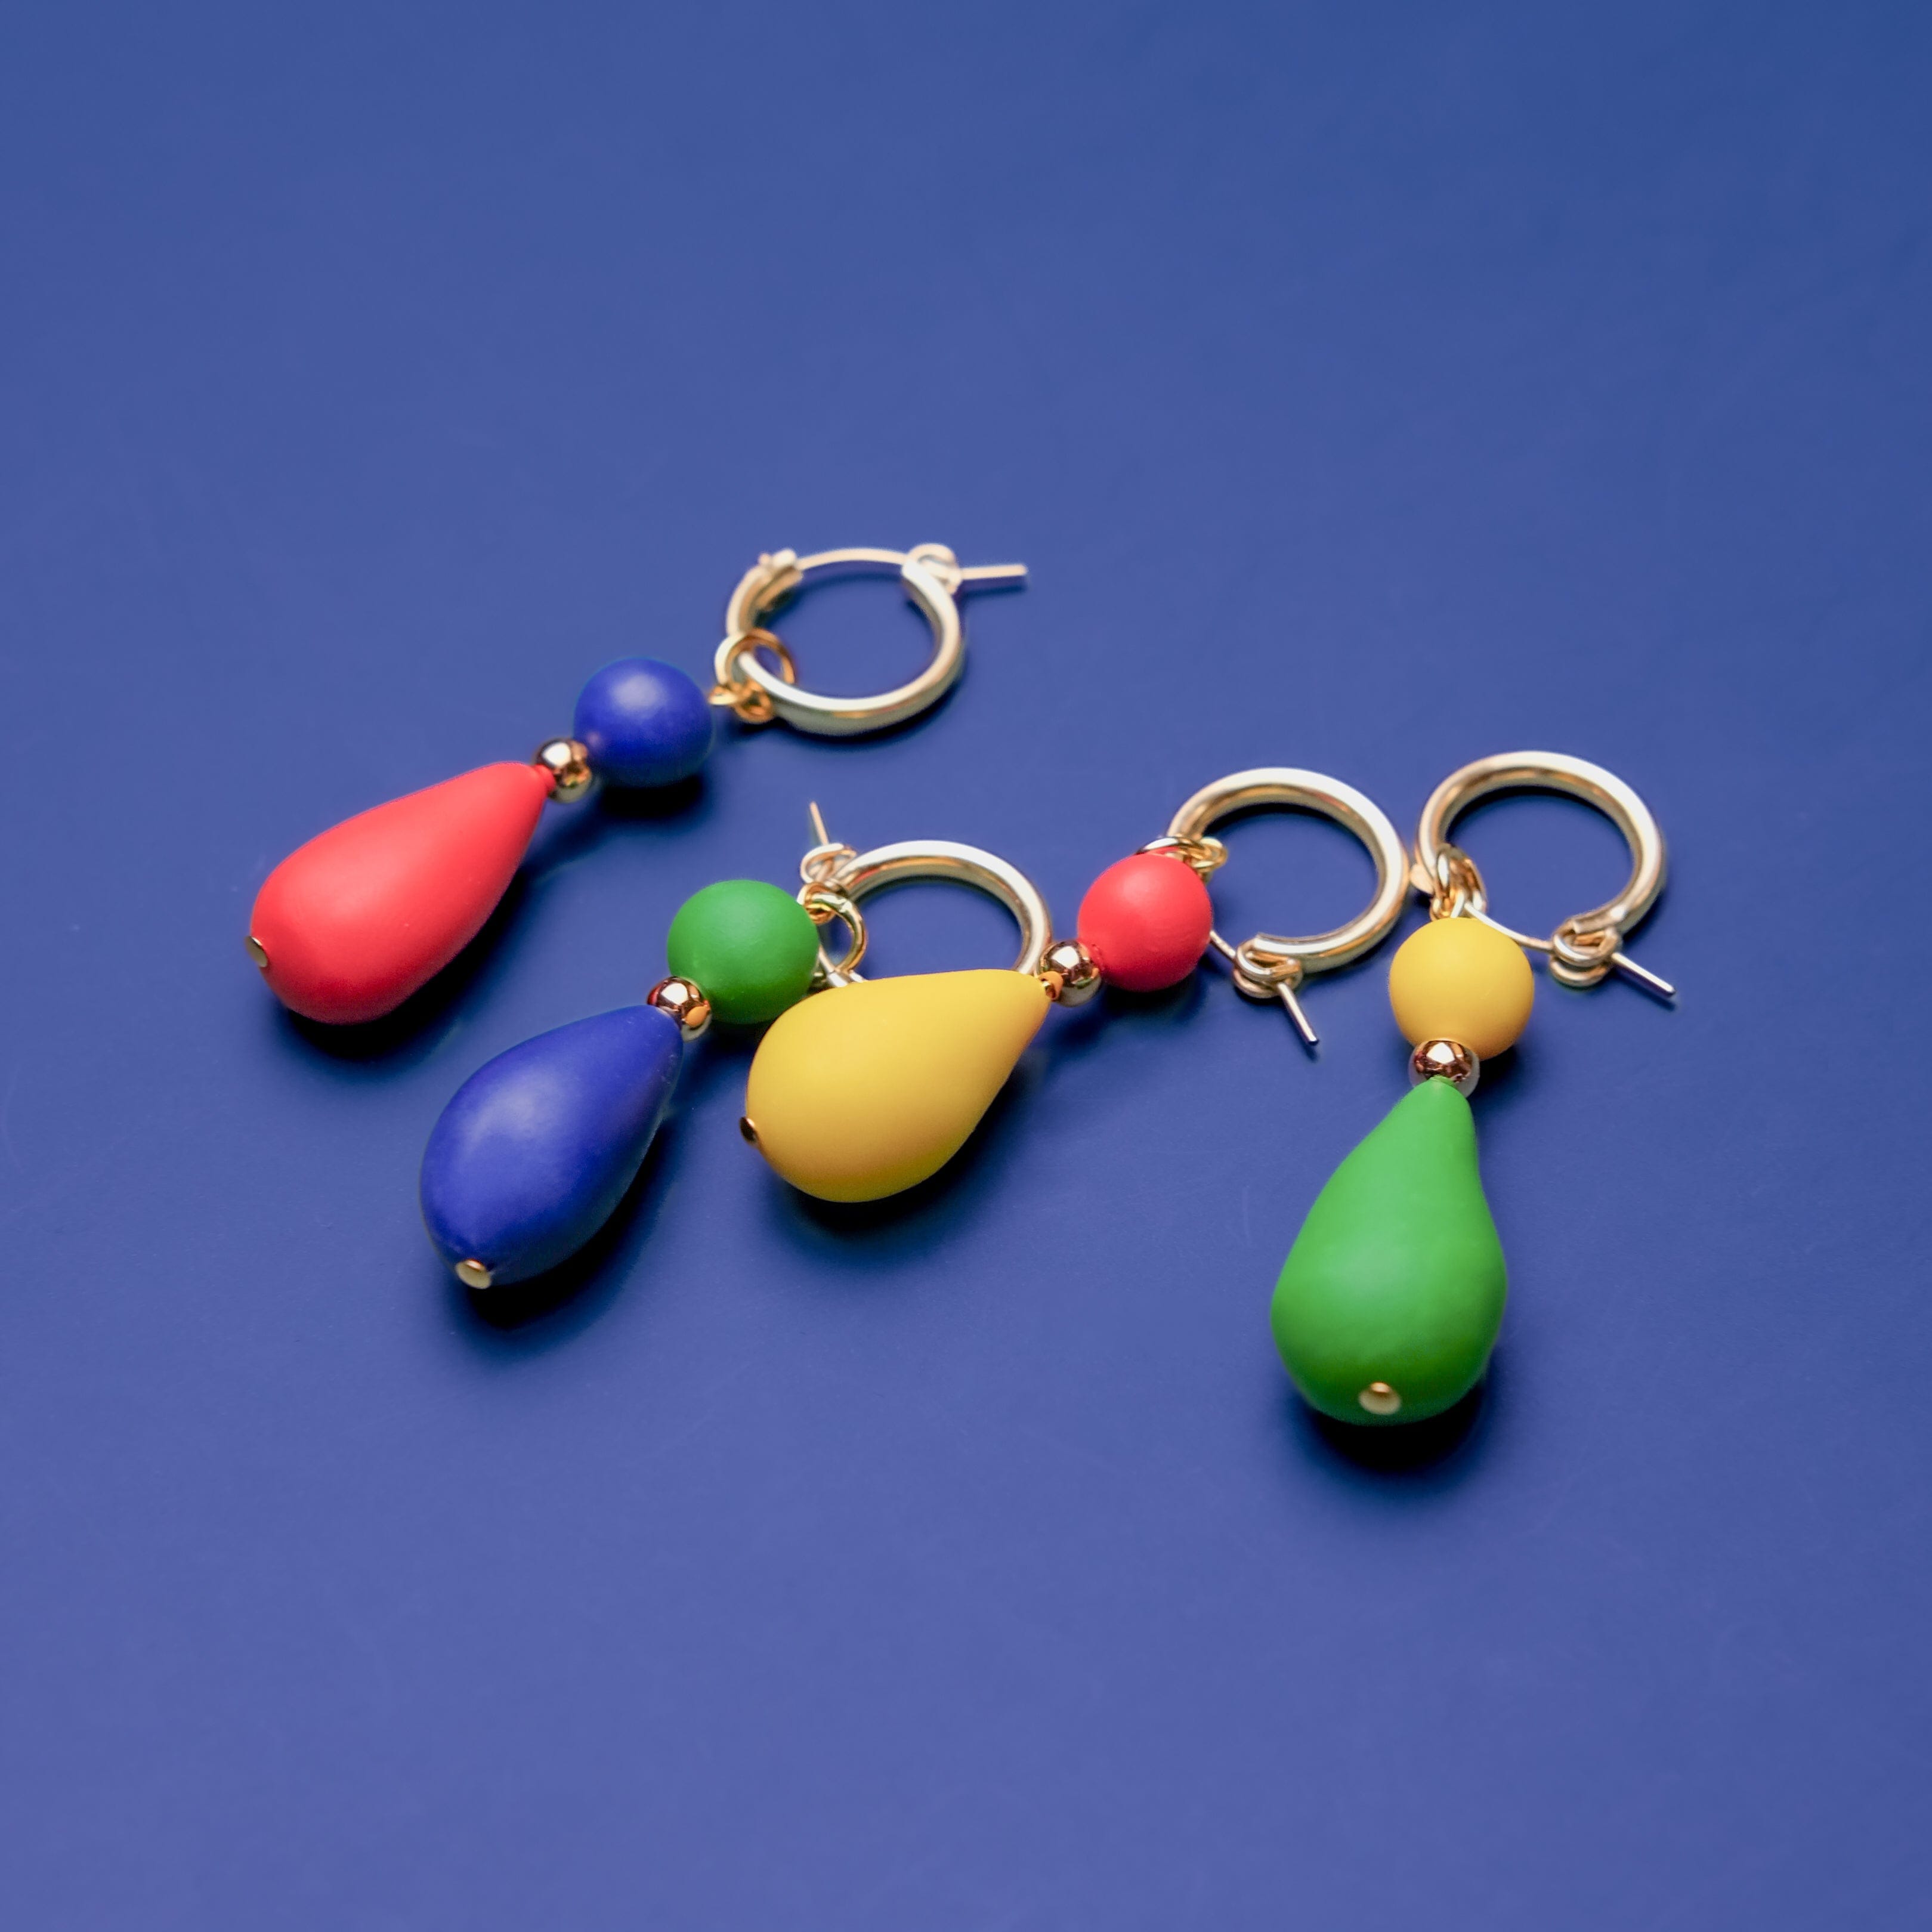 Mismatched Color Blocked Earring Charm SetMismatched Color Blocked Earring Charm Set